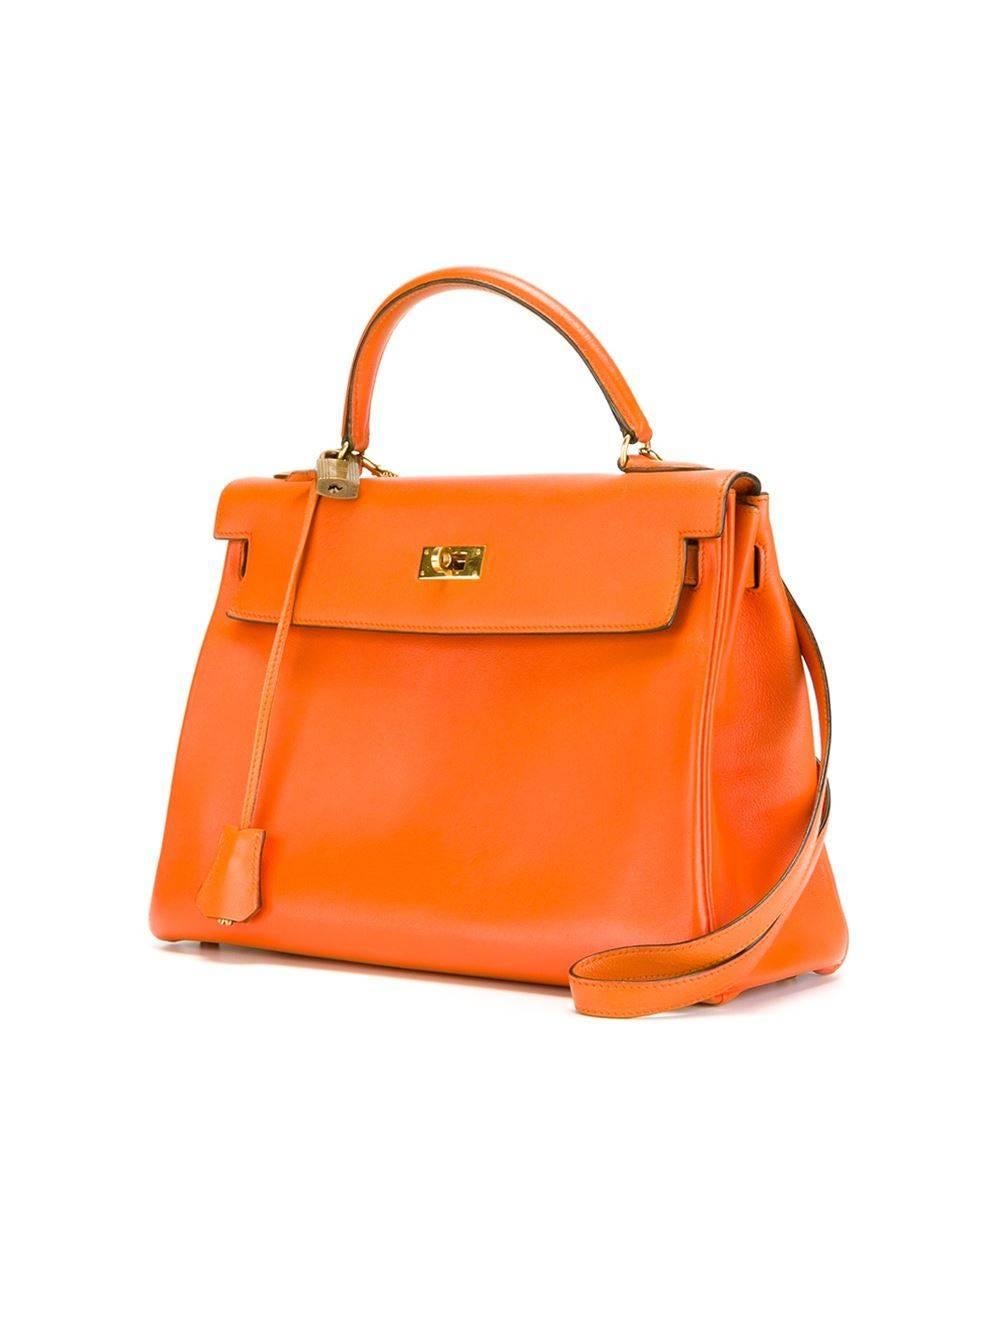 Hermes Vintage Kelly bag in 32cm, in orange leather. This classic bag features gold- plated hardware and comes with it's original lock and key, and shoulder strap.

Colour: Orange

Material: Leather

Measurements: W: 32cm, H: 22cm D: